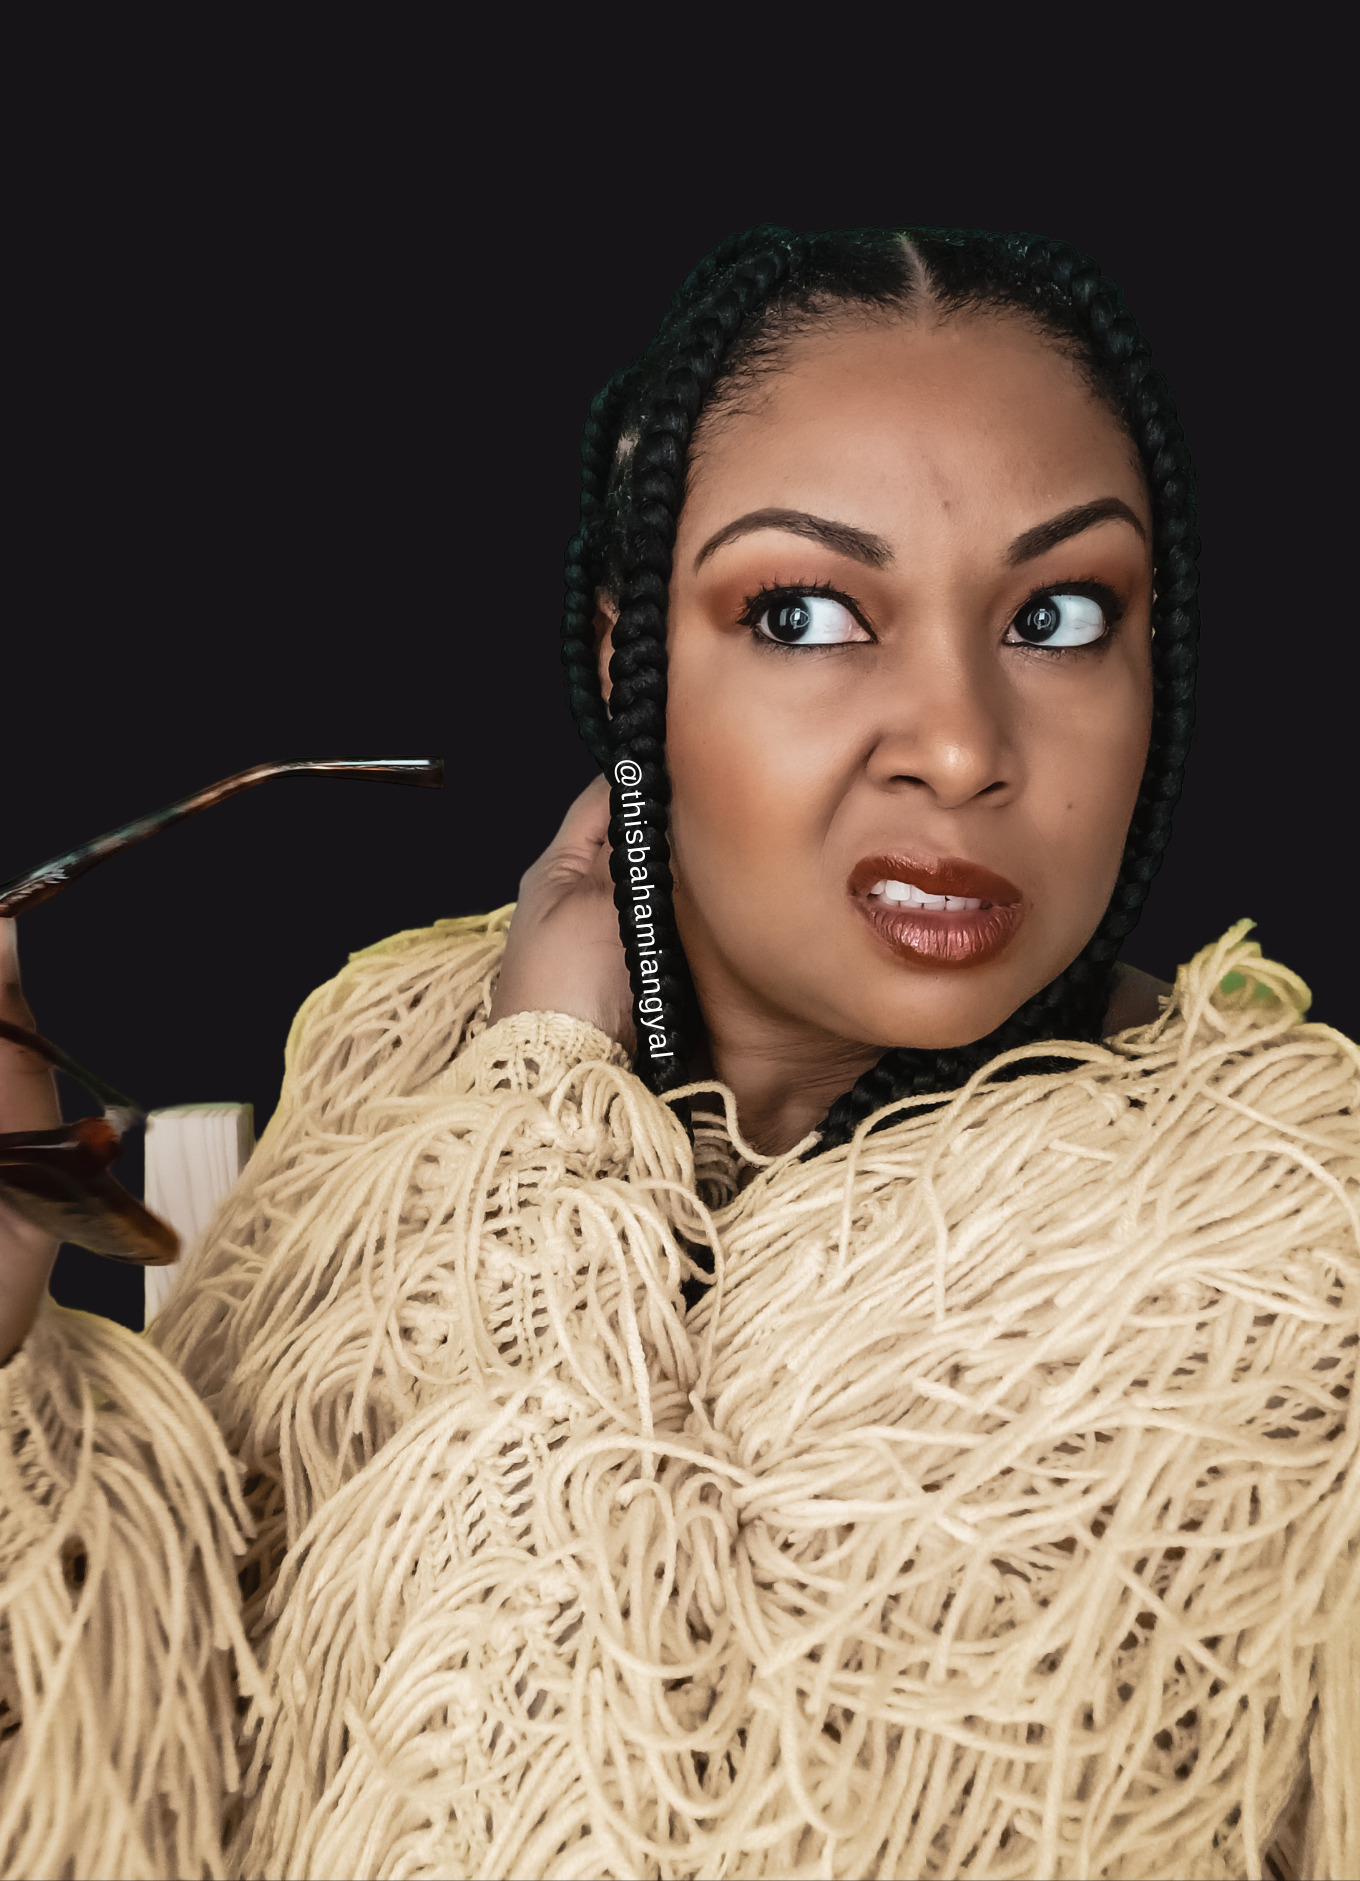 Black woman wears a pained expression on her face as she touches her heavy box braids.